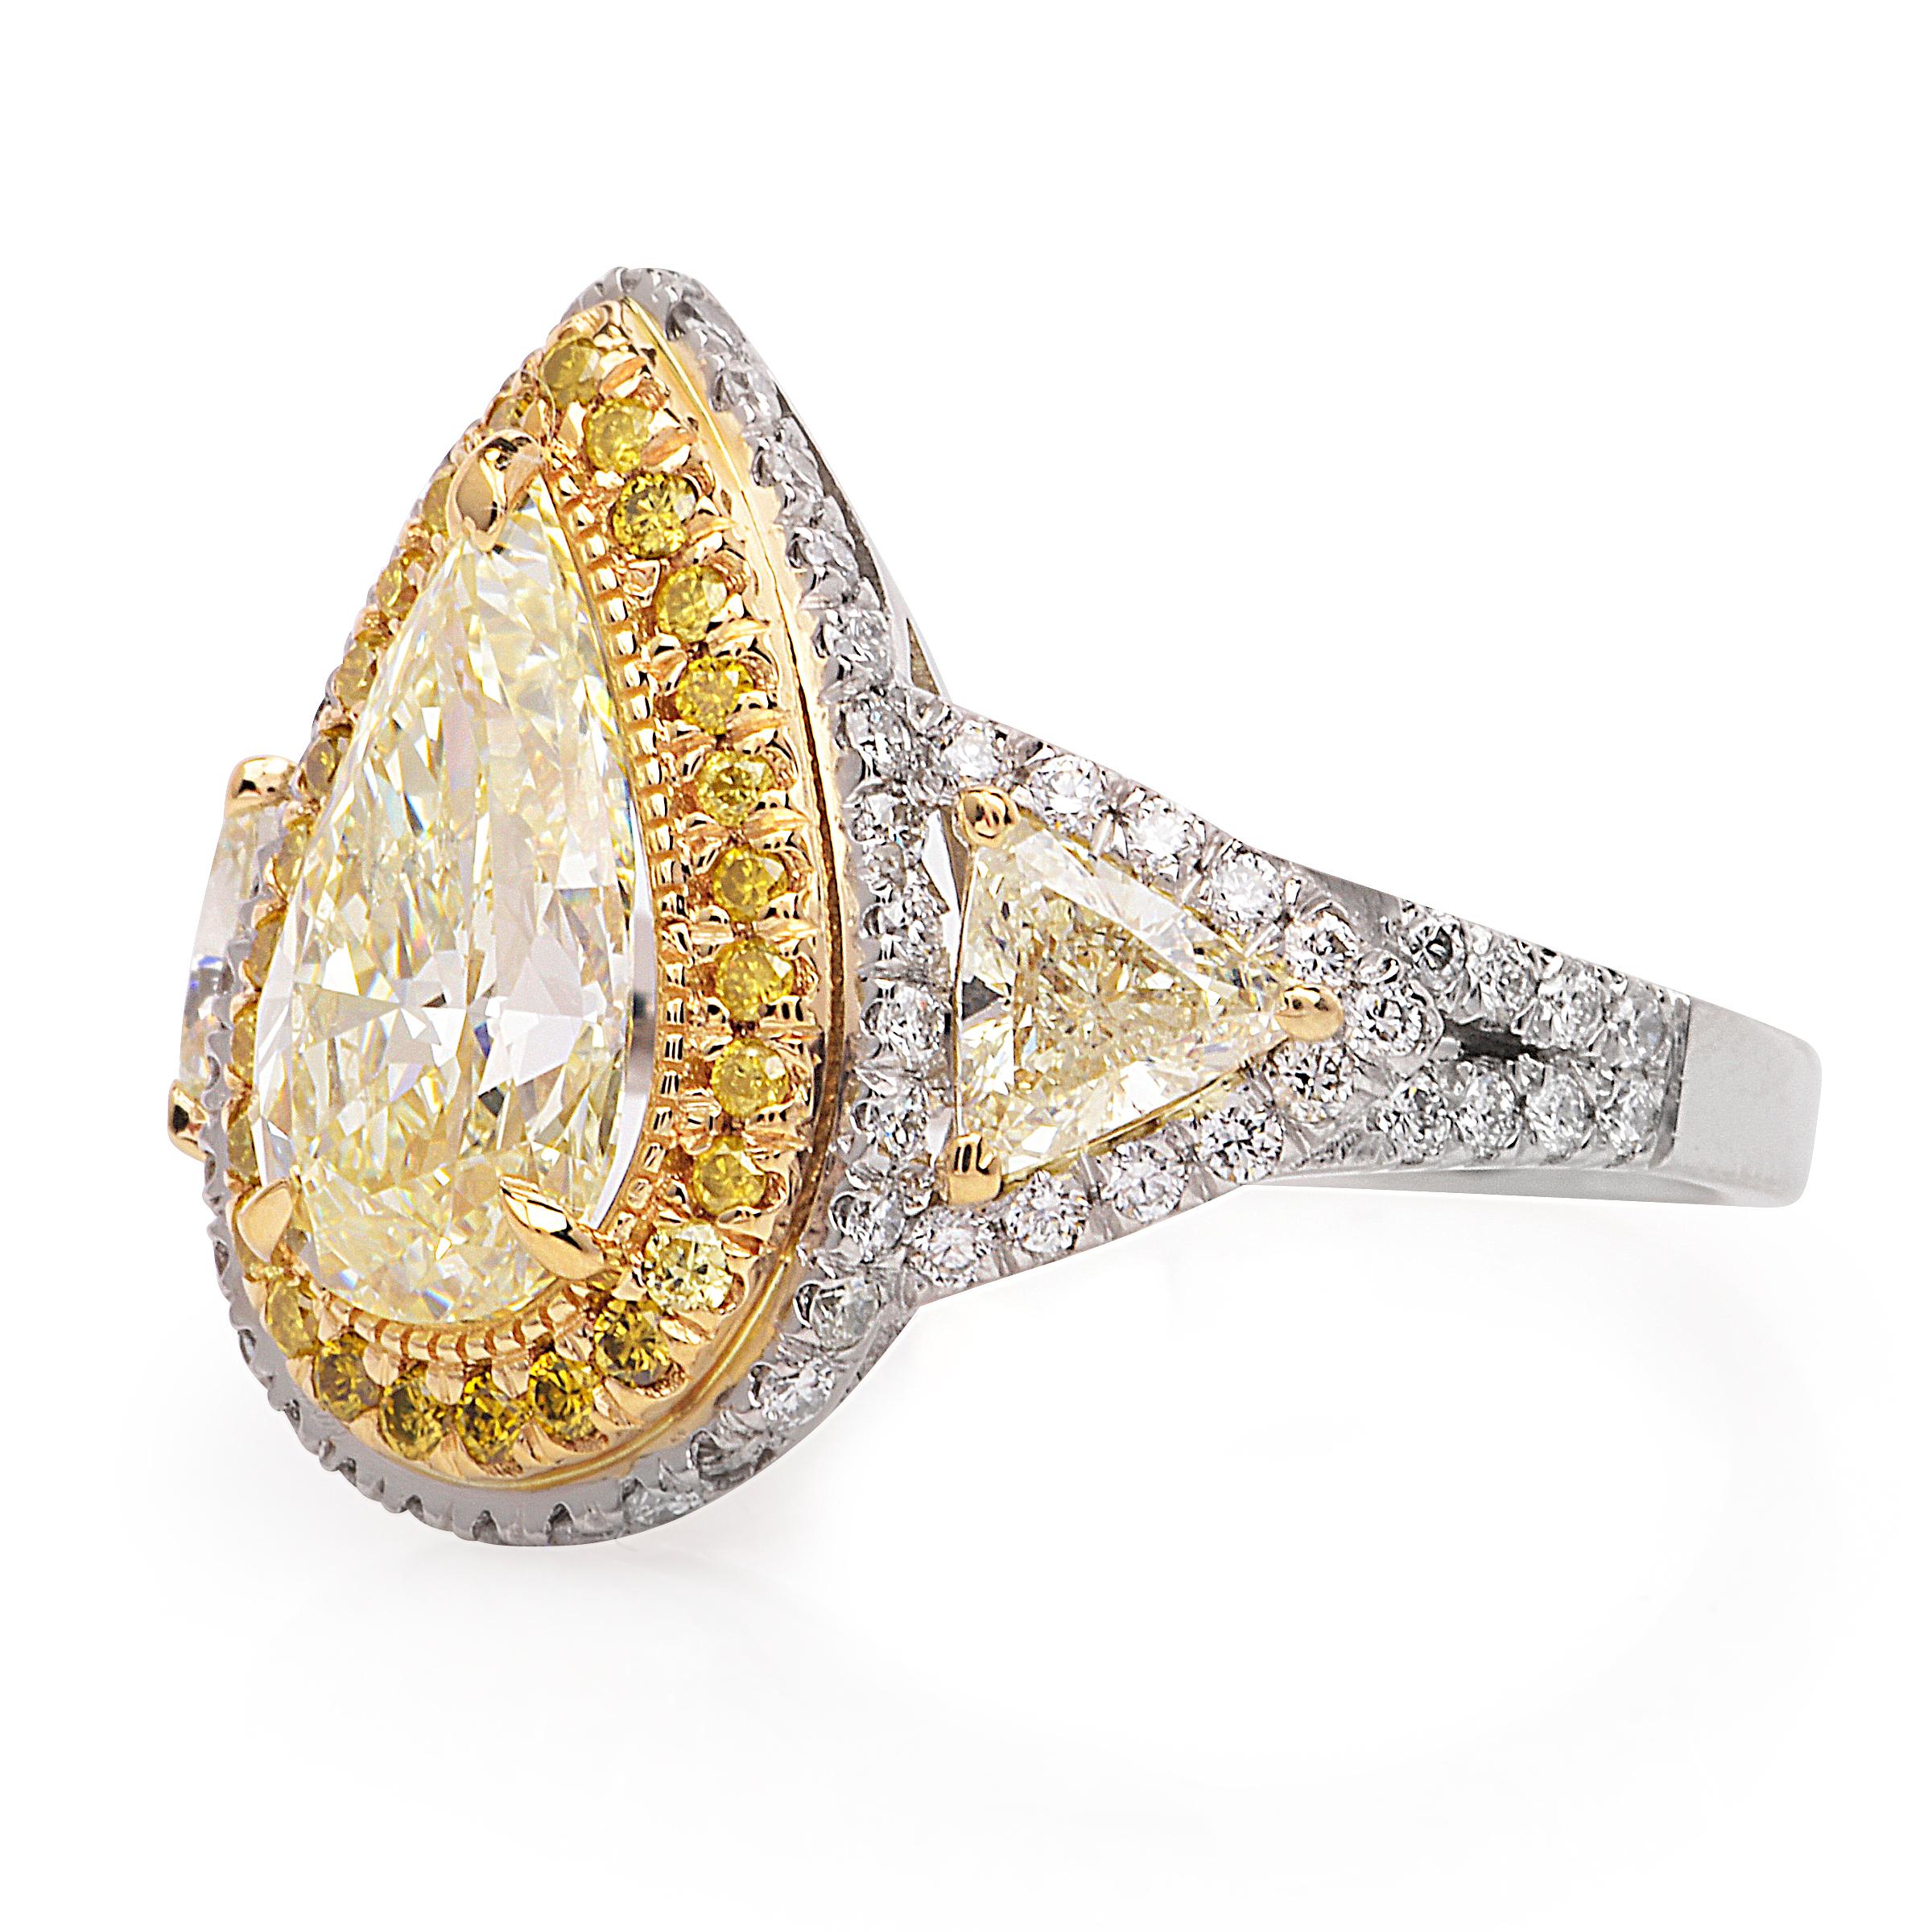 This vintage inspired Engagement Ring crafted in luxurious Platinum and 18k yellow .

Adorning the center is one pear shaped 

Fancy yellow pear shaped diamond weighing approx. 2.39 carats. 

This yellow diamond is of VS2-SI1 clarity with even color